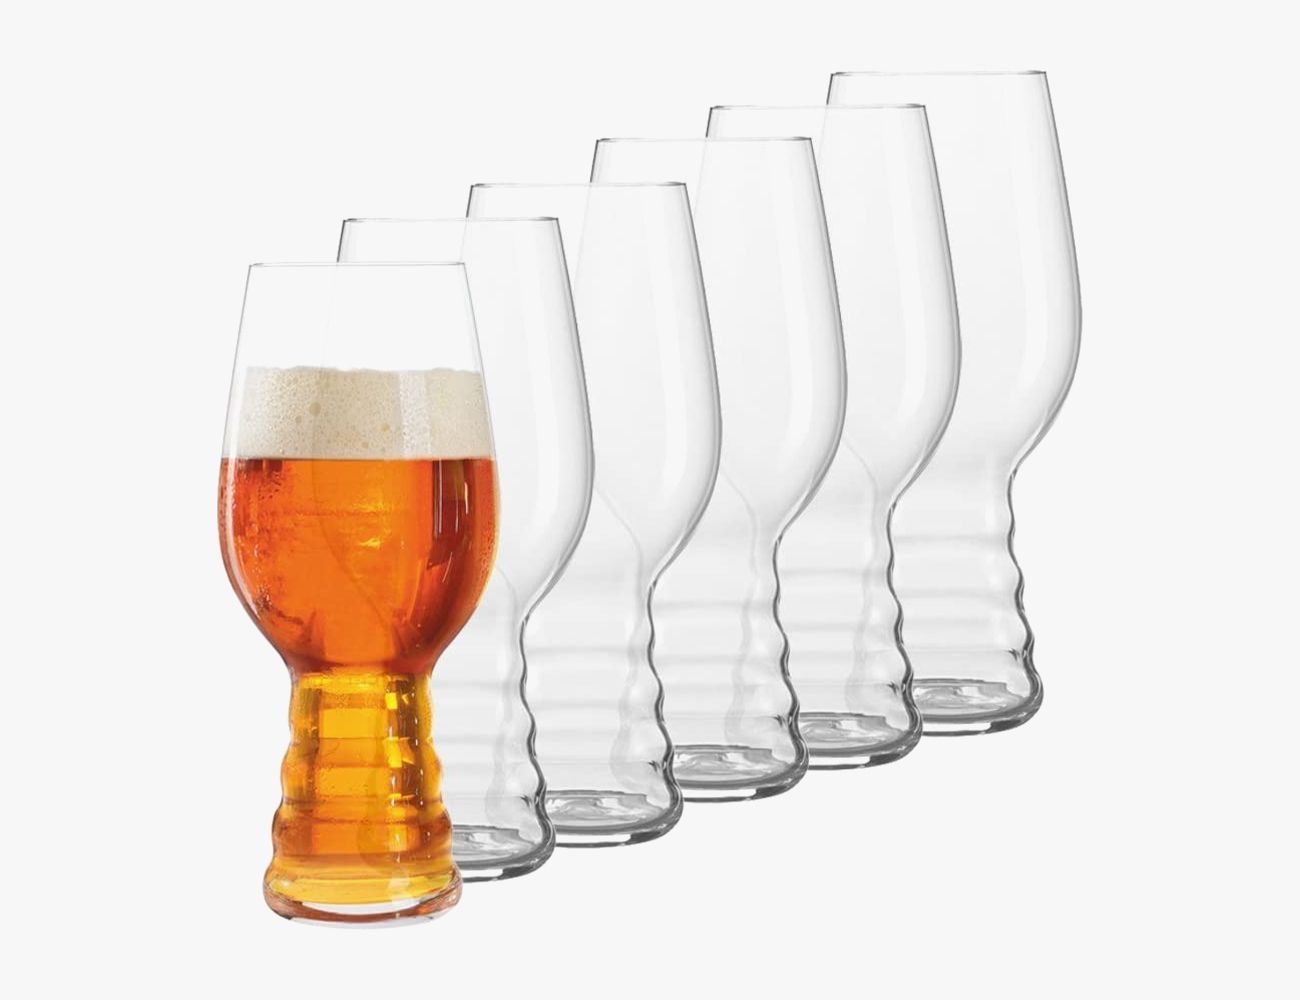 Beer Glasses Set of 6 British 20 oz Pint Glasses by Glavers, Uniquely Designed Easy-Grip European Pub Beer Pilsner Tumblers for Wheat, Ale, Juice